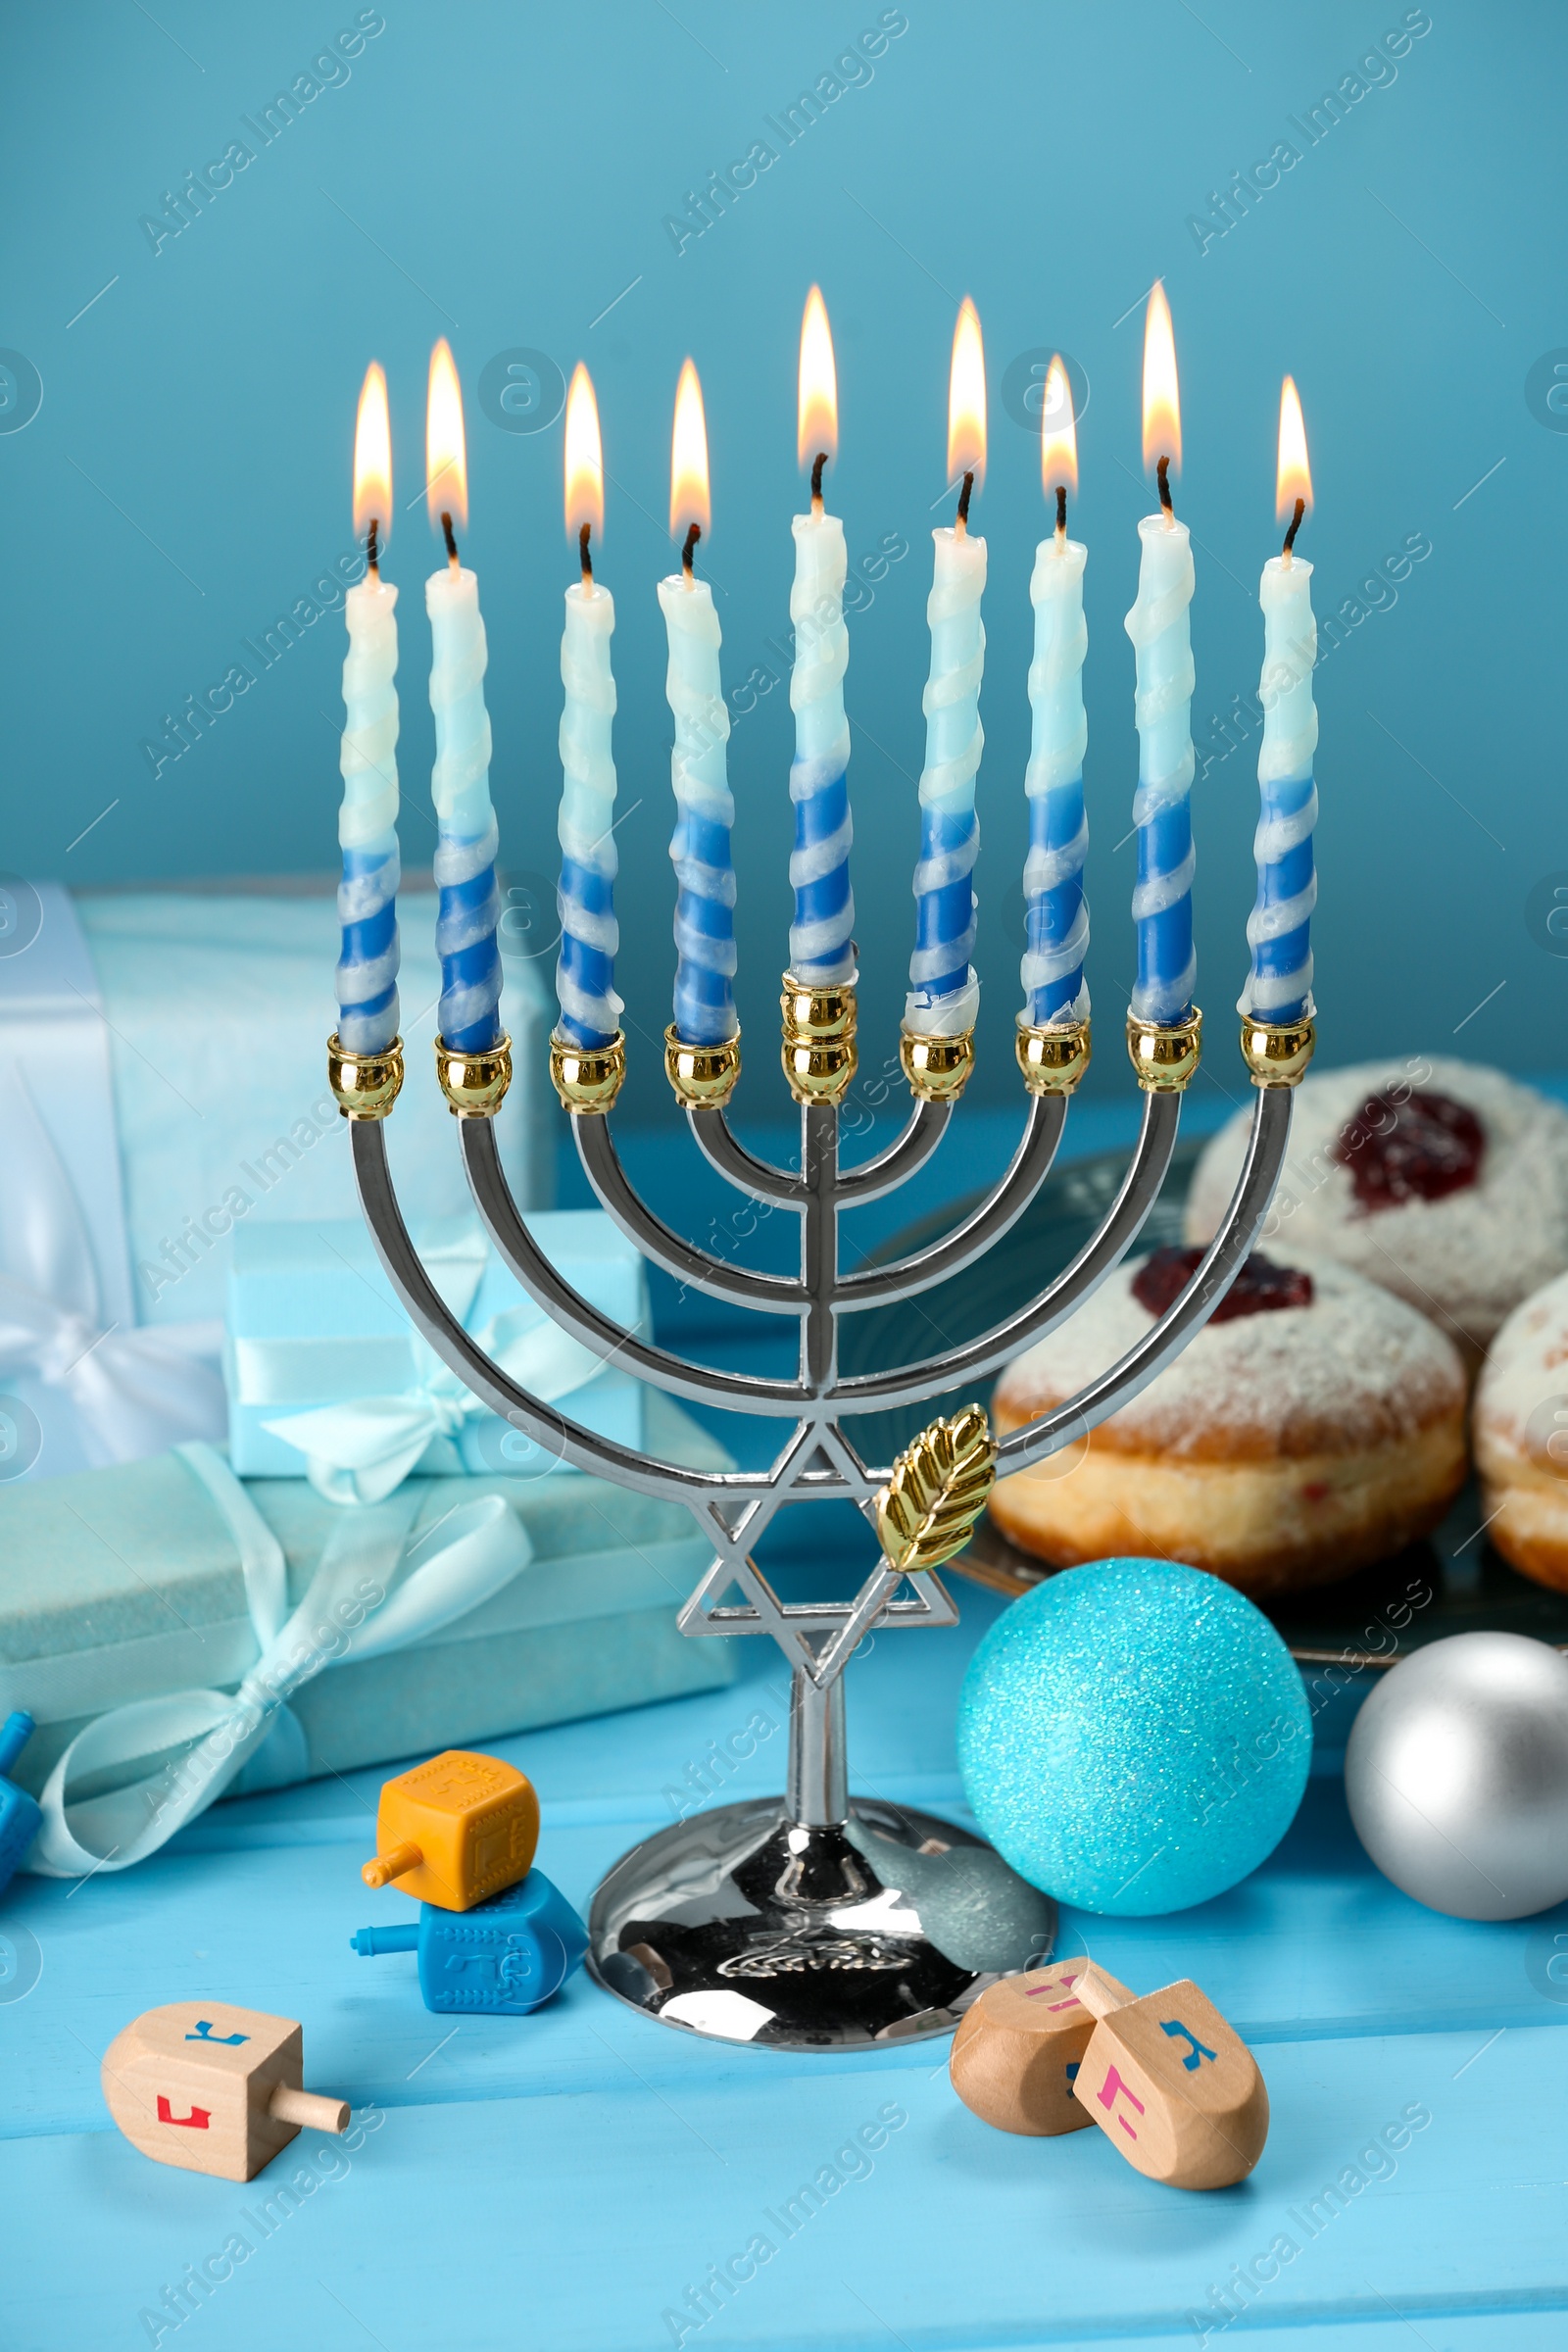 Photo of Composition with Hanukkah menorah, dreidels, donuts and gift boxes on table against light blue background